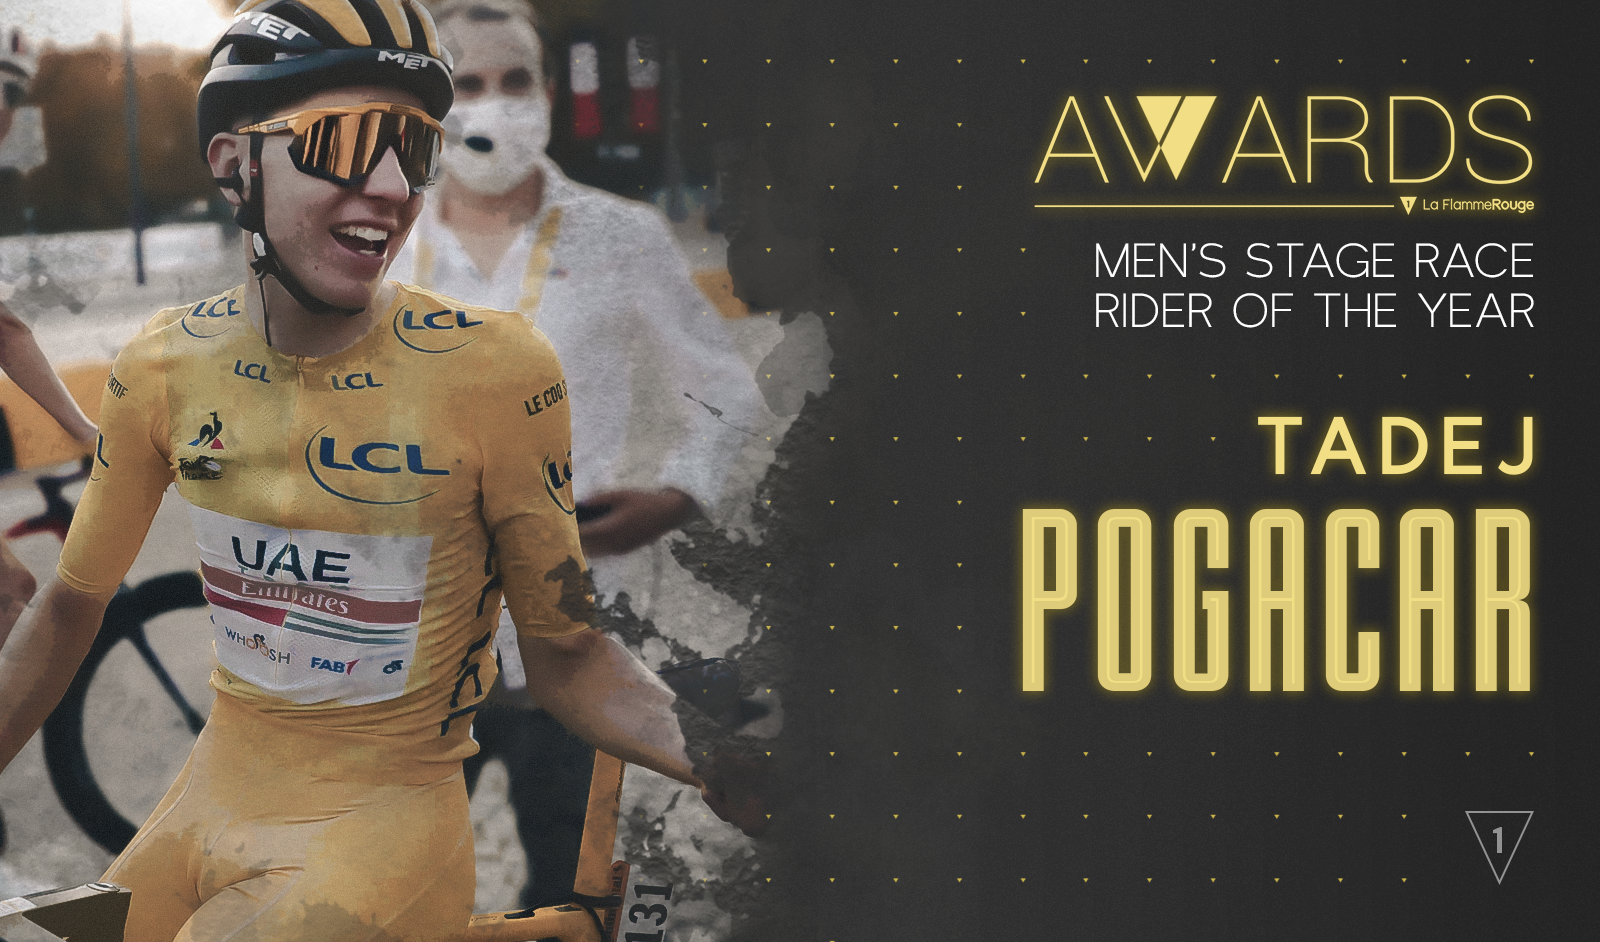 Men’s stage race rider of the year